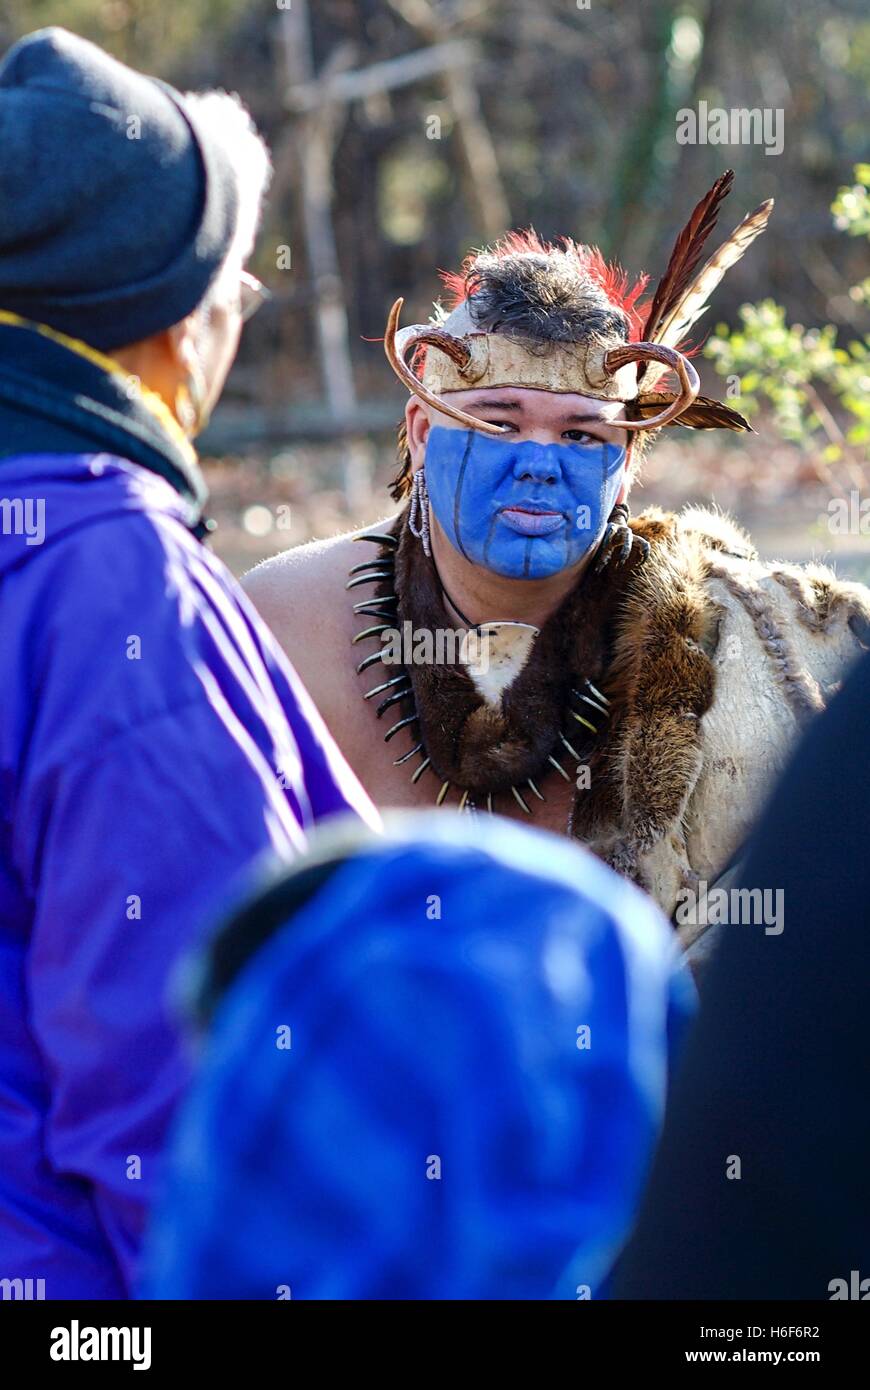 A Native American interpreter educates tourists at the Jamestowne Settlement adjacent to the actual Jamestown historic site. Stock Photo